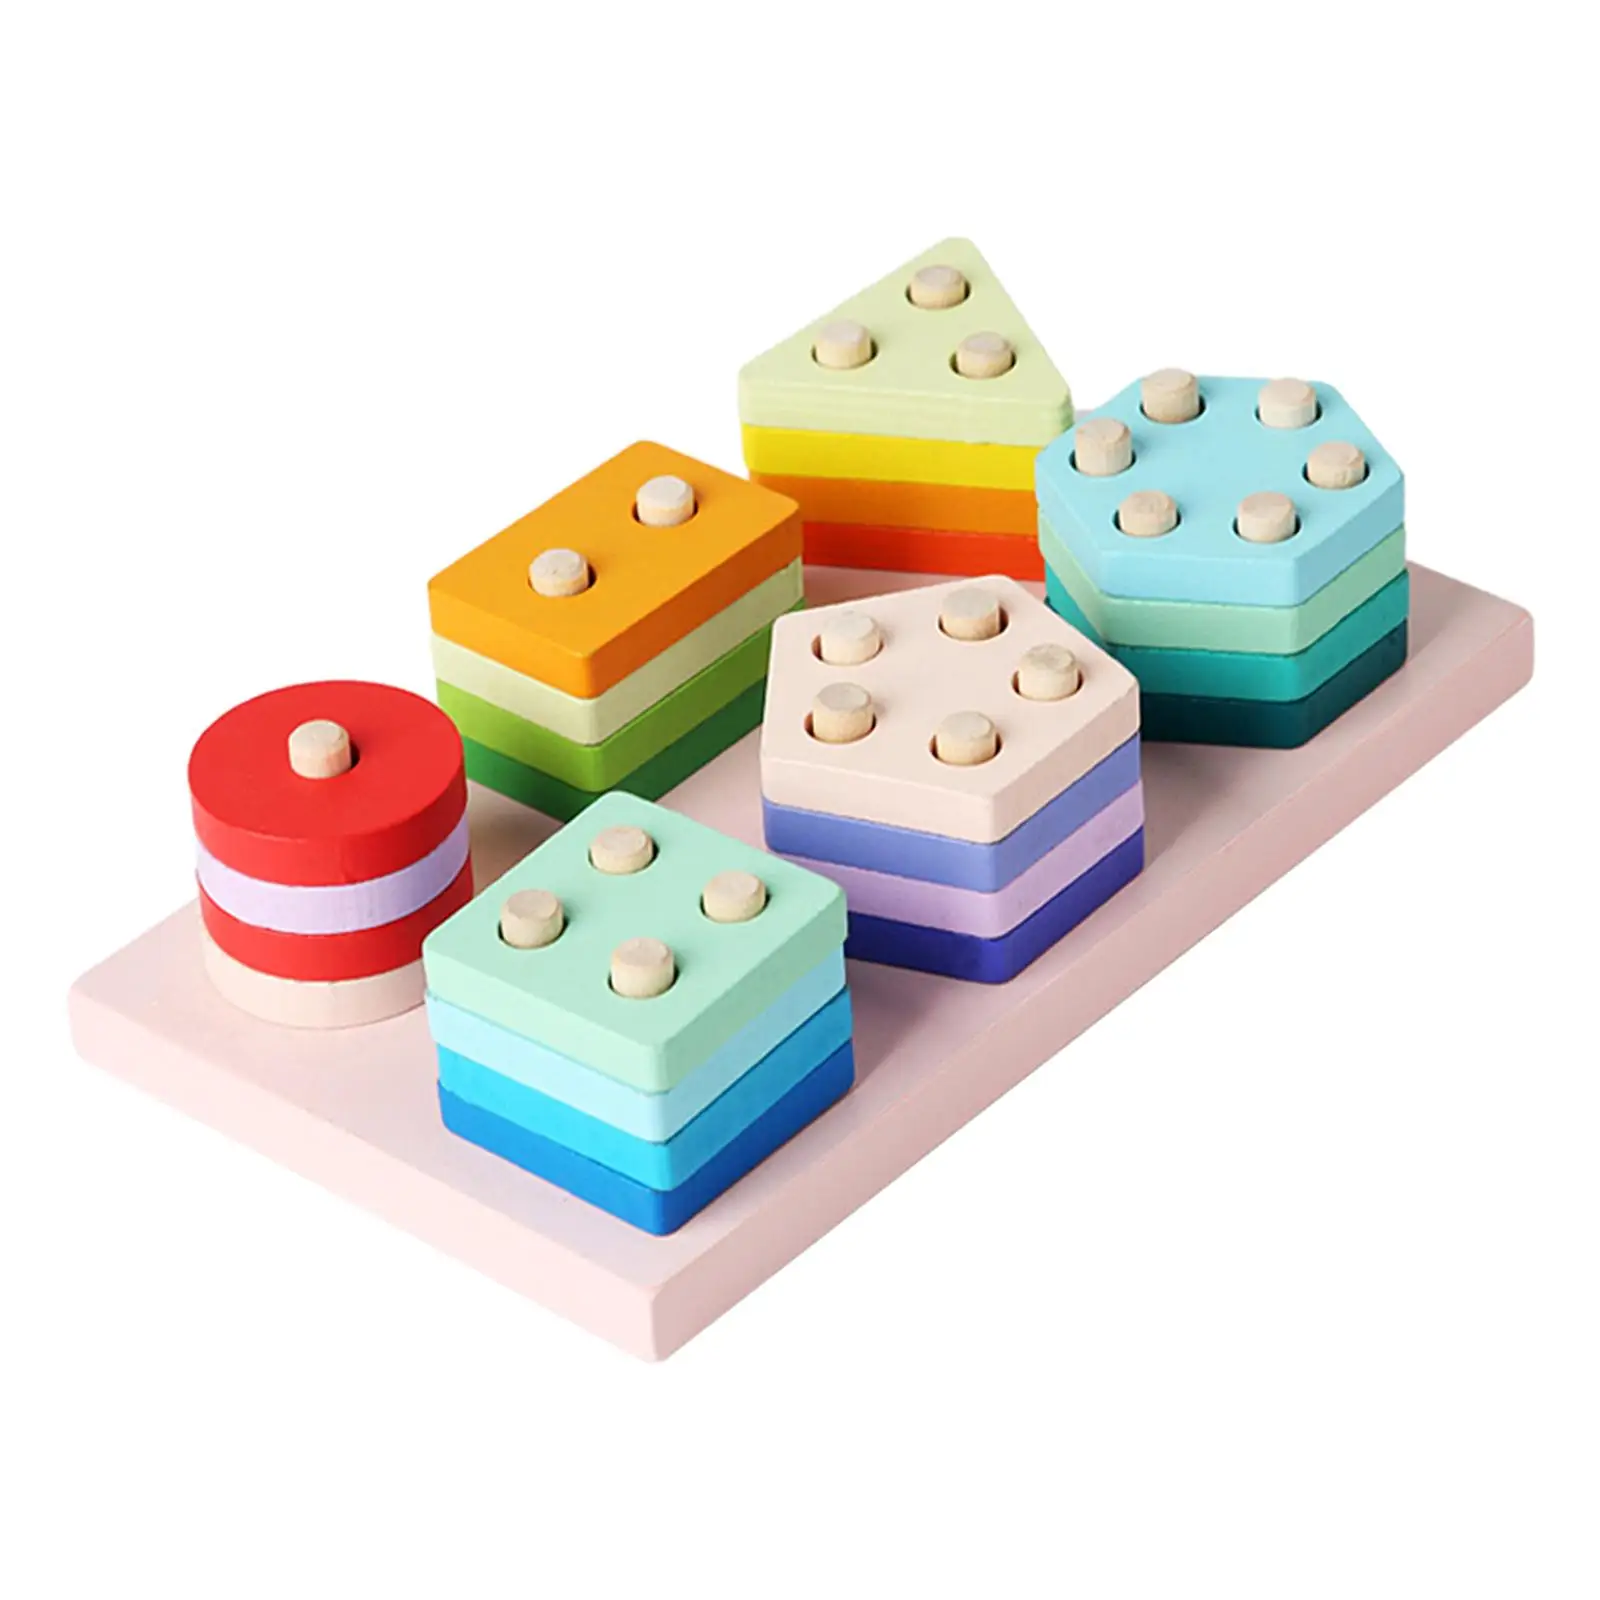 Wooden Sorting Matching Puzzle Preschool Learning Activity Sensory Toy Wood Shape Stacking Toy for Boys Girls Children Kids